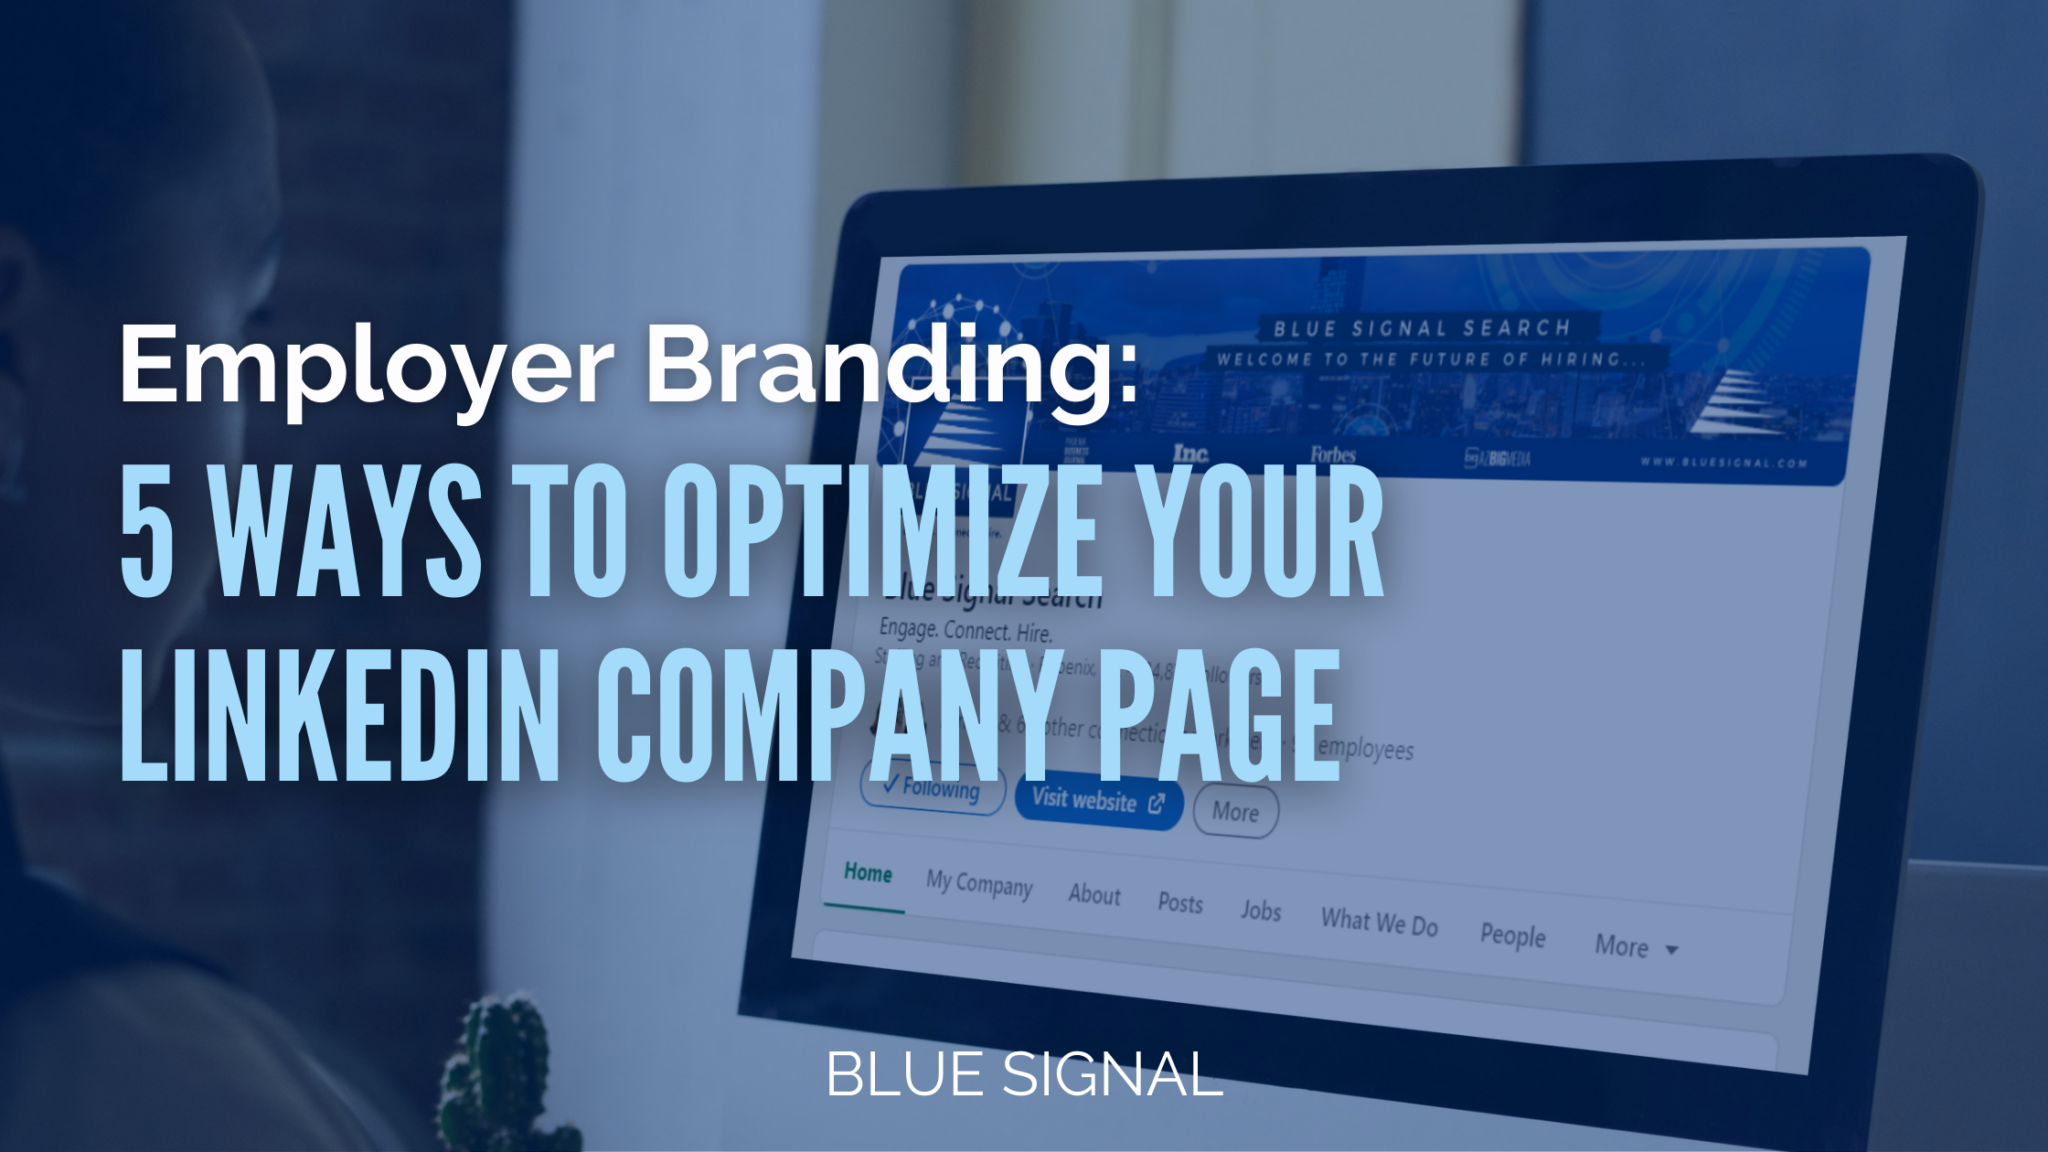 Employer Branding: 5 Ways to Optimize Your LinkedIn Company Page